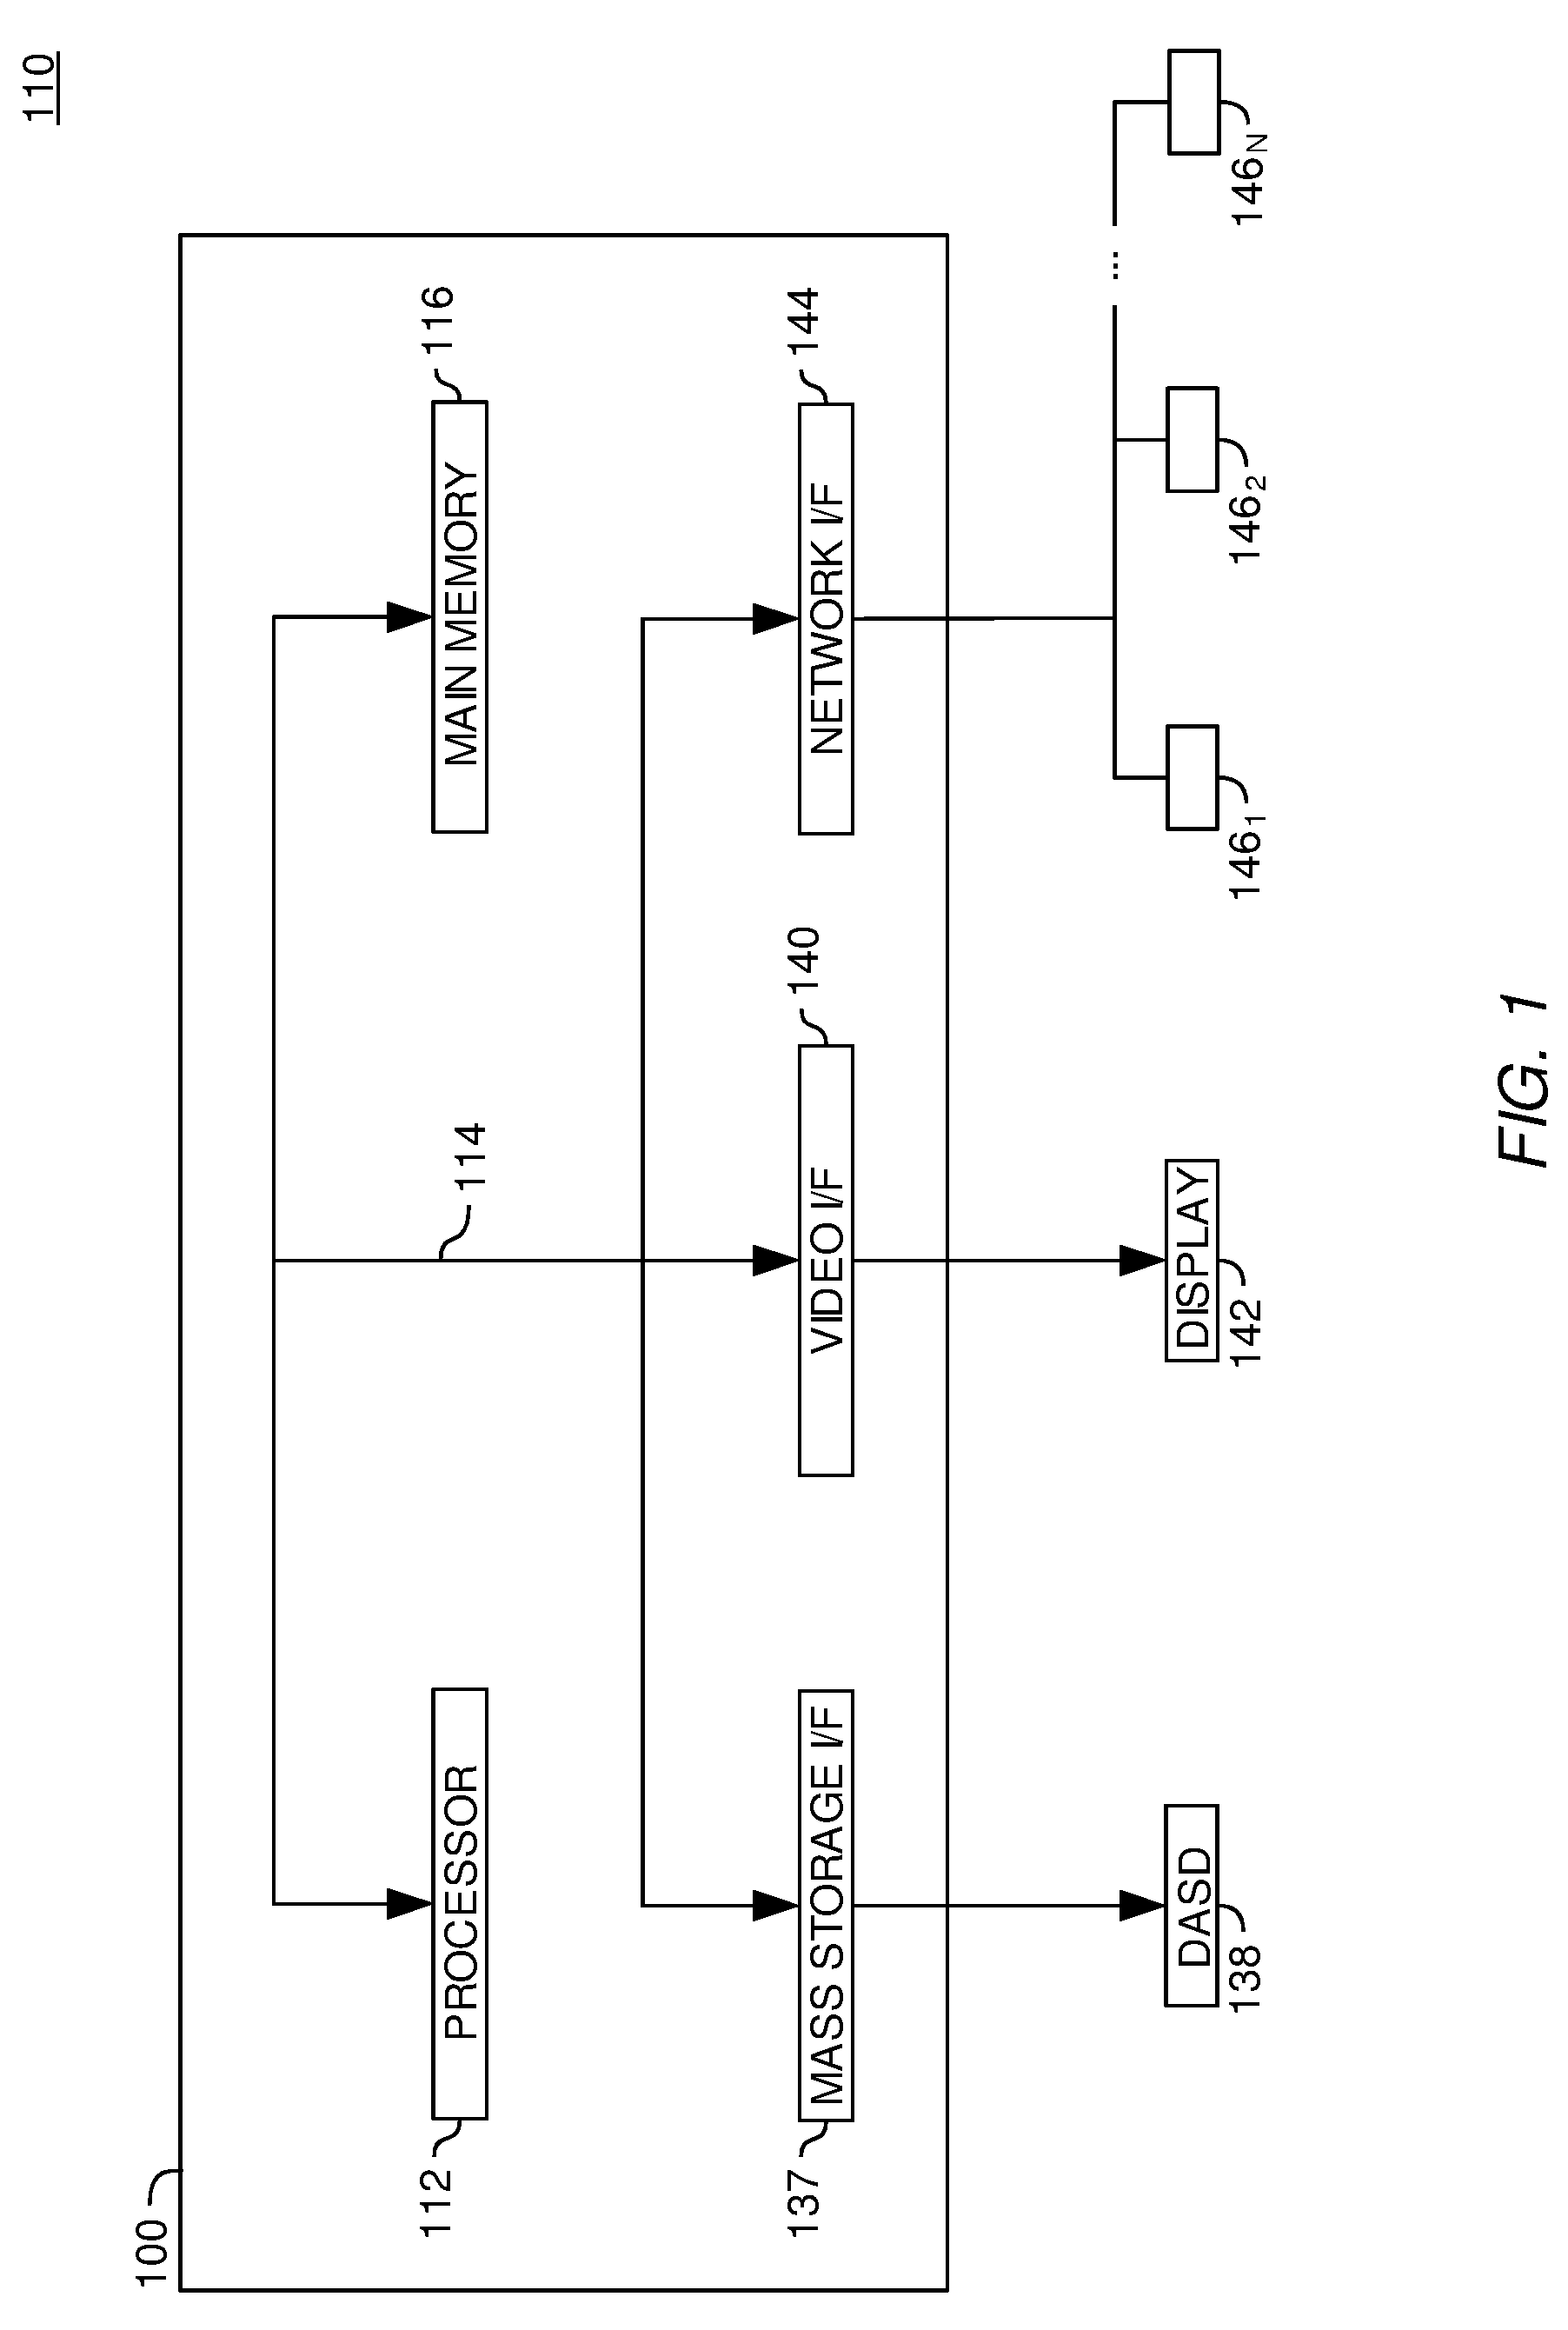 Method and system for performing a clean operation on a query result